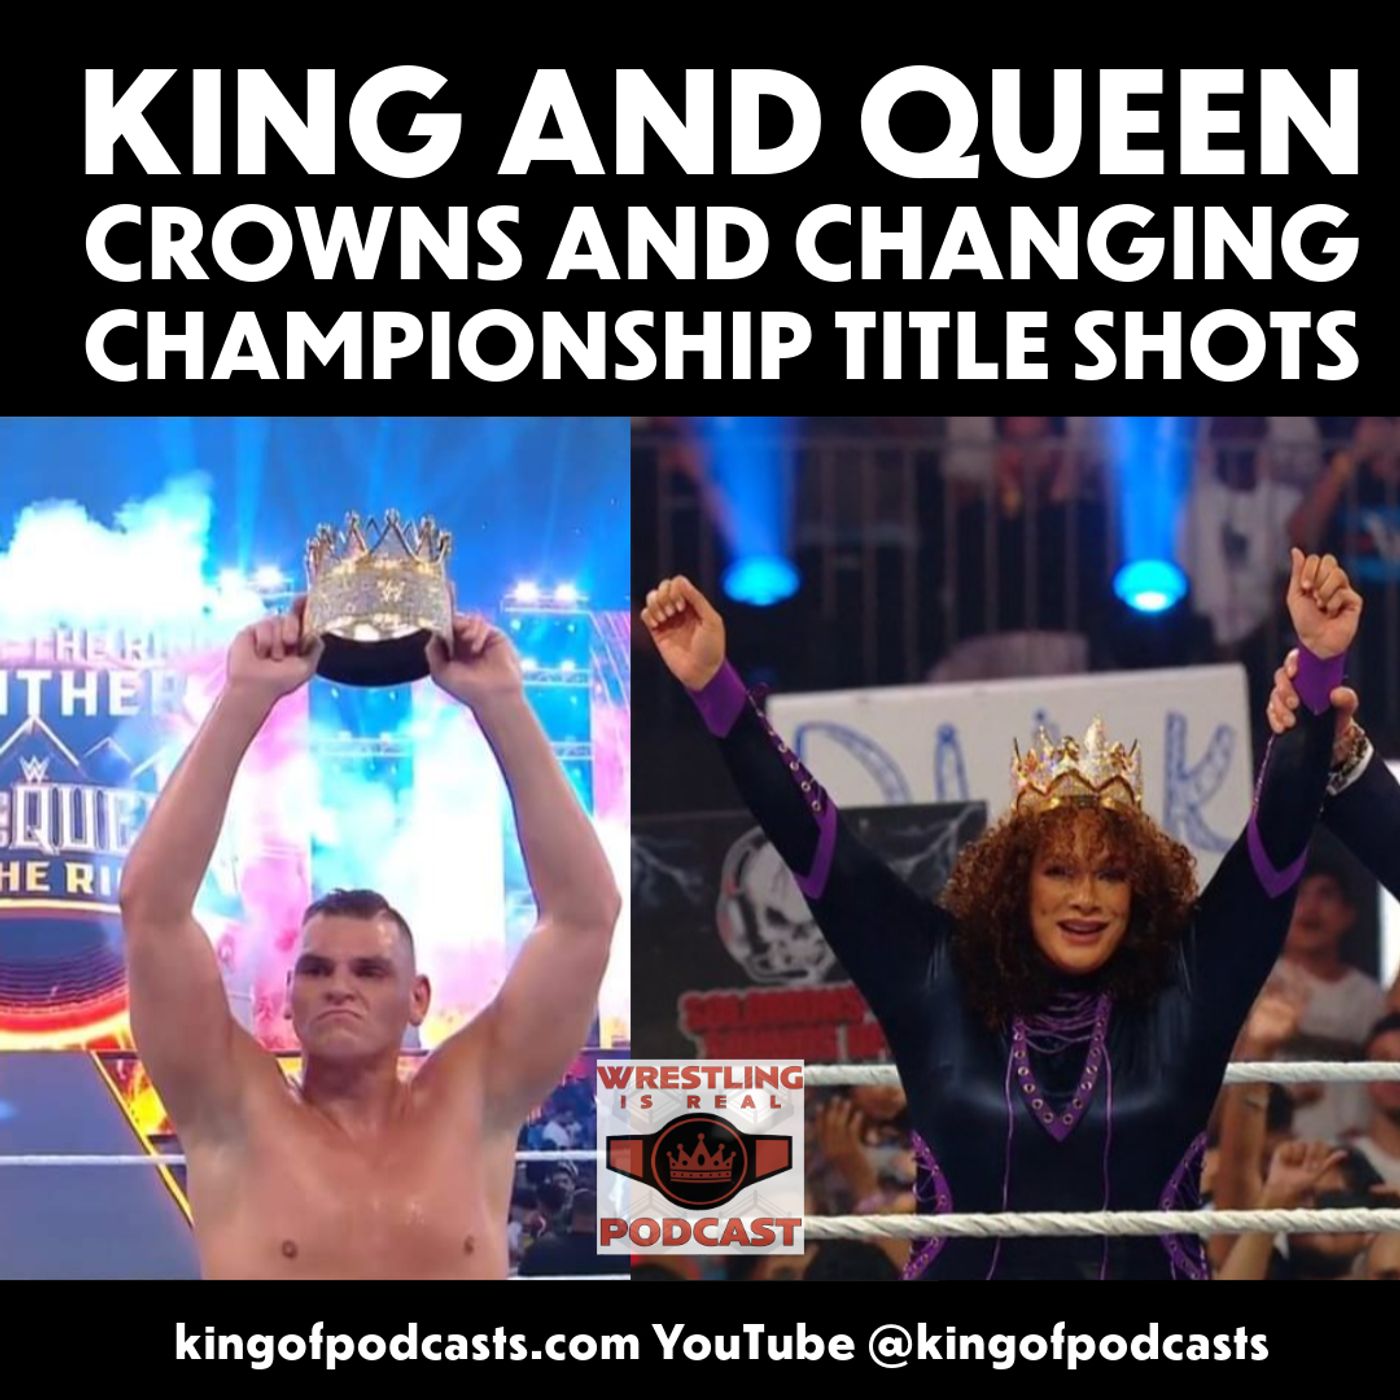 King and Queen Crowns and Changing Championship Title Shots (ep.850)